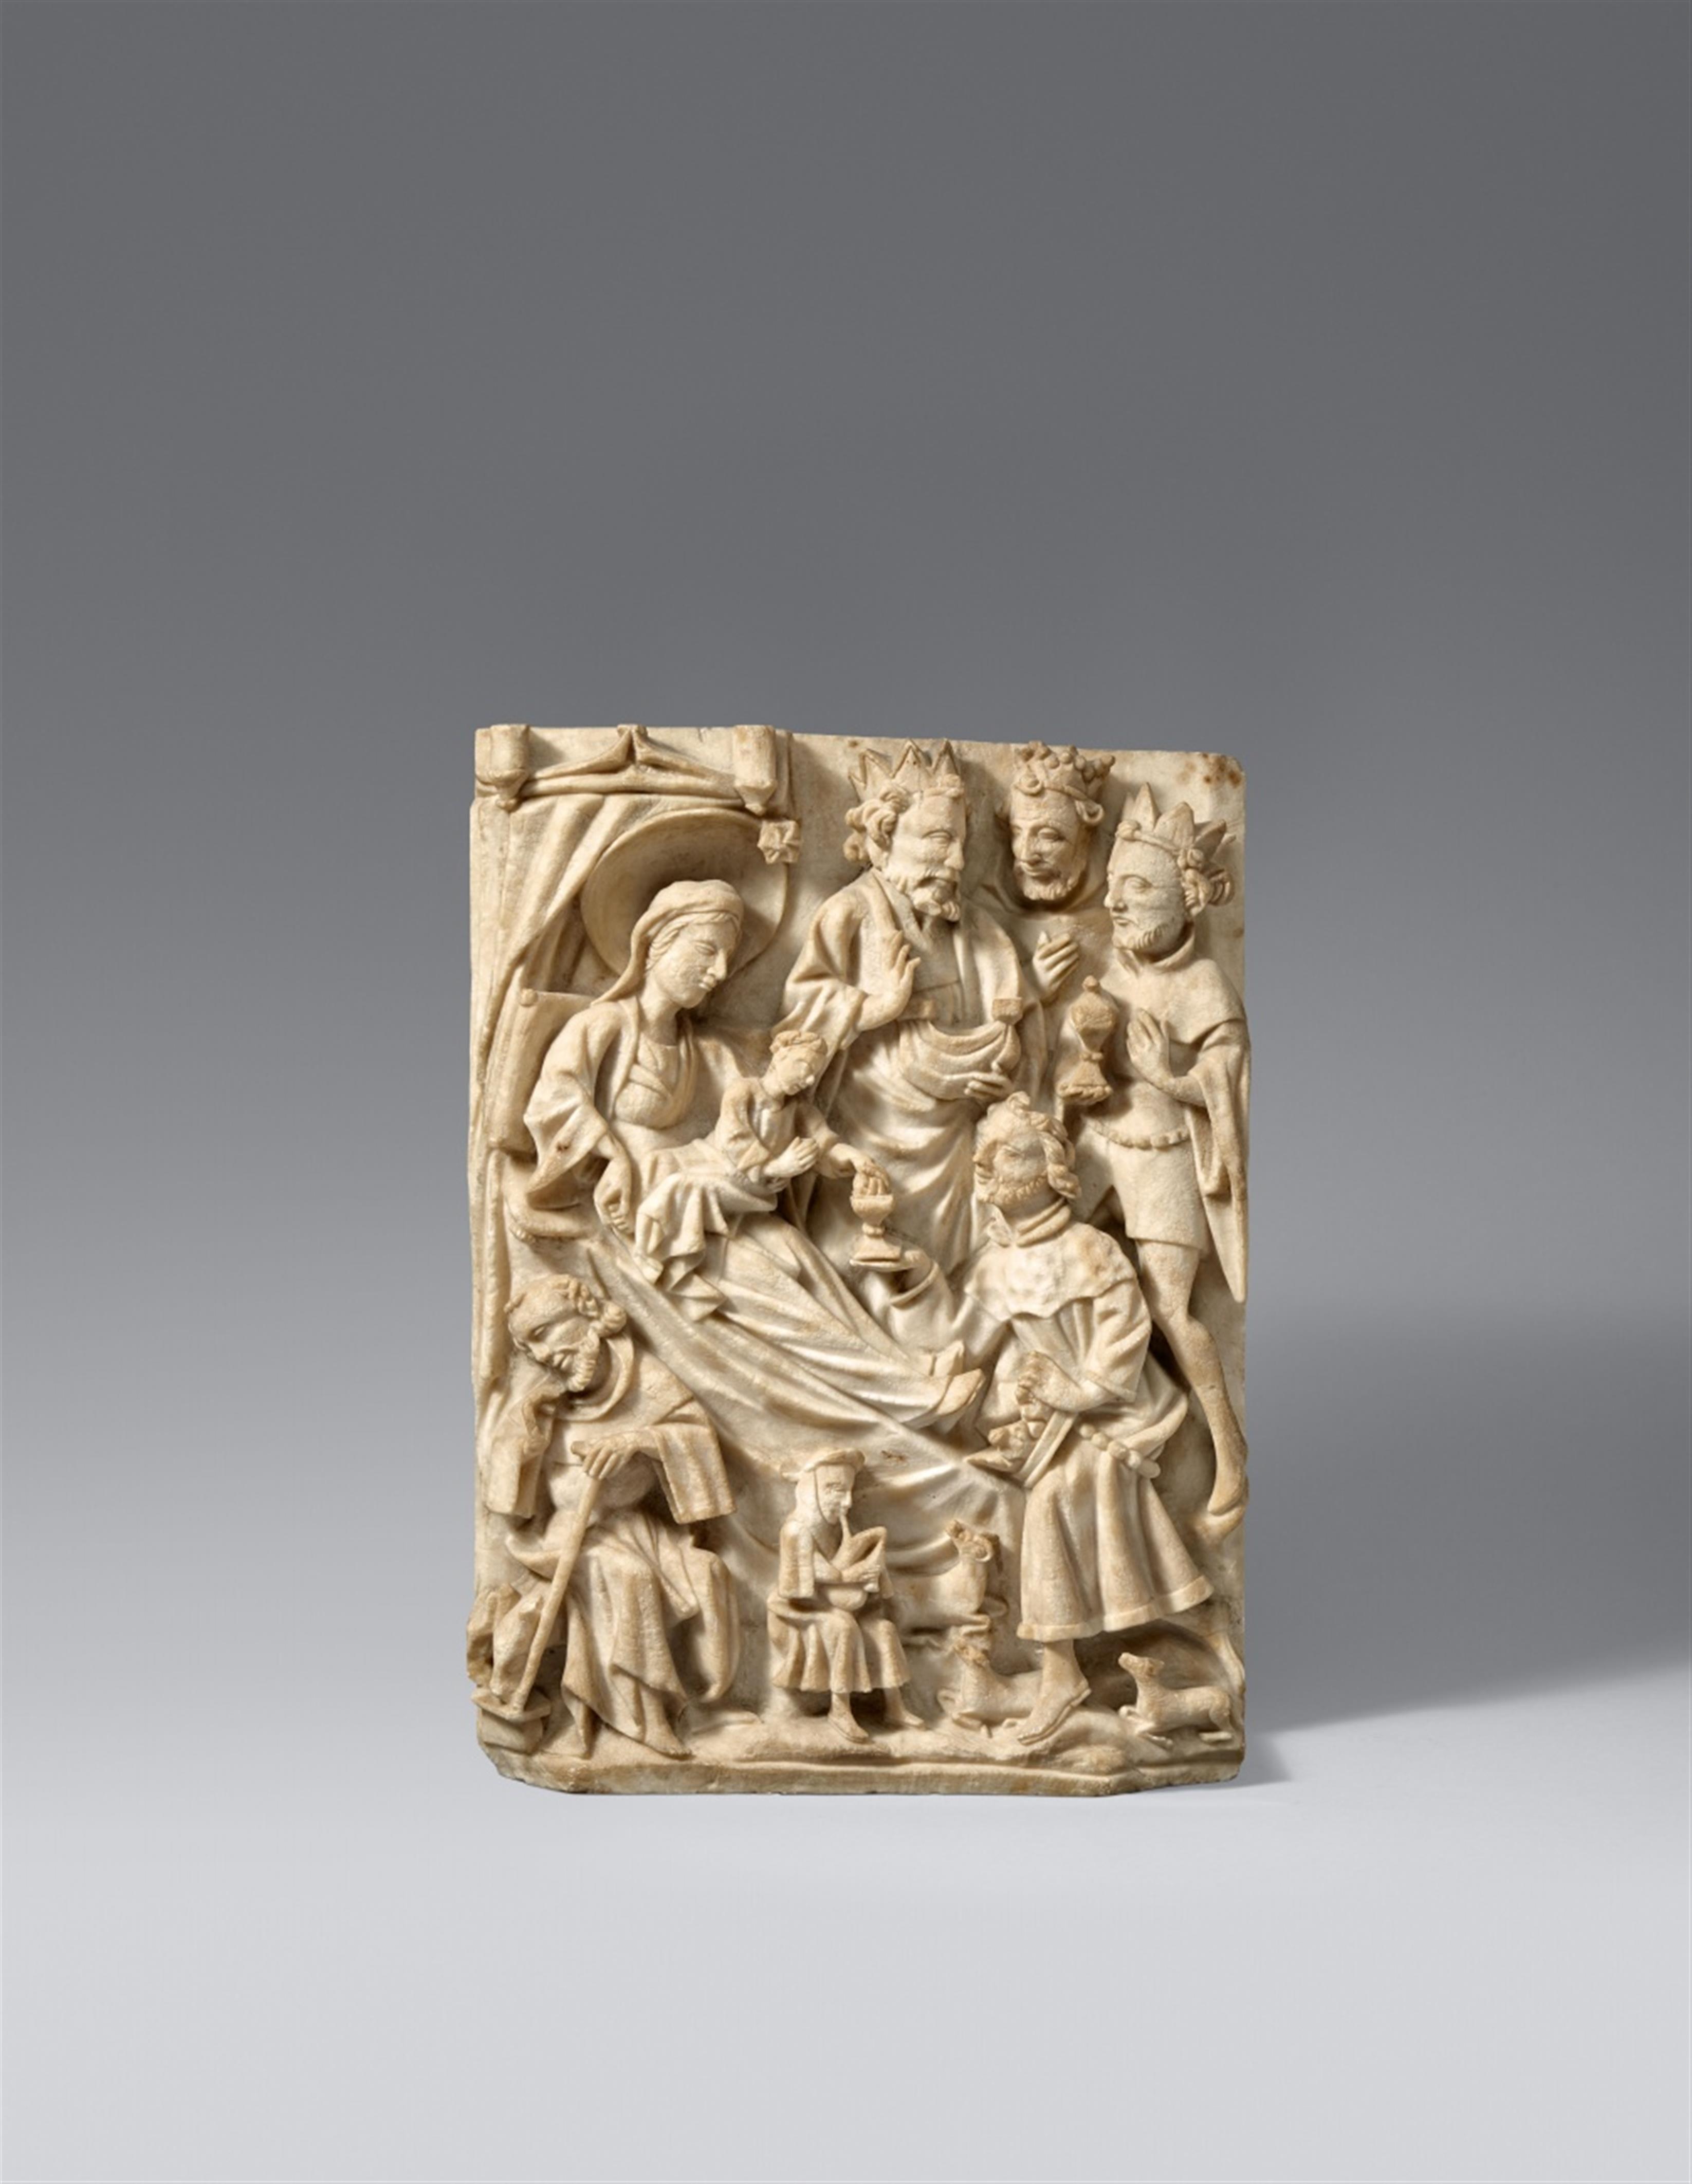 Nottingham mid-15th century - A mid-15th century Nottingham alabaster relief of the Adoration of the Magi - image-1